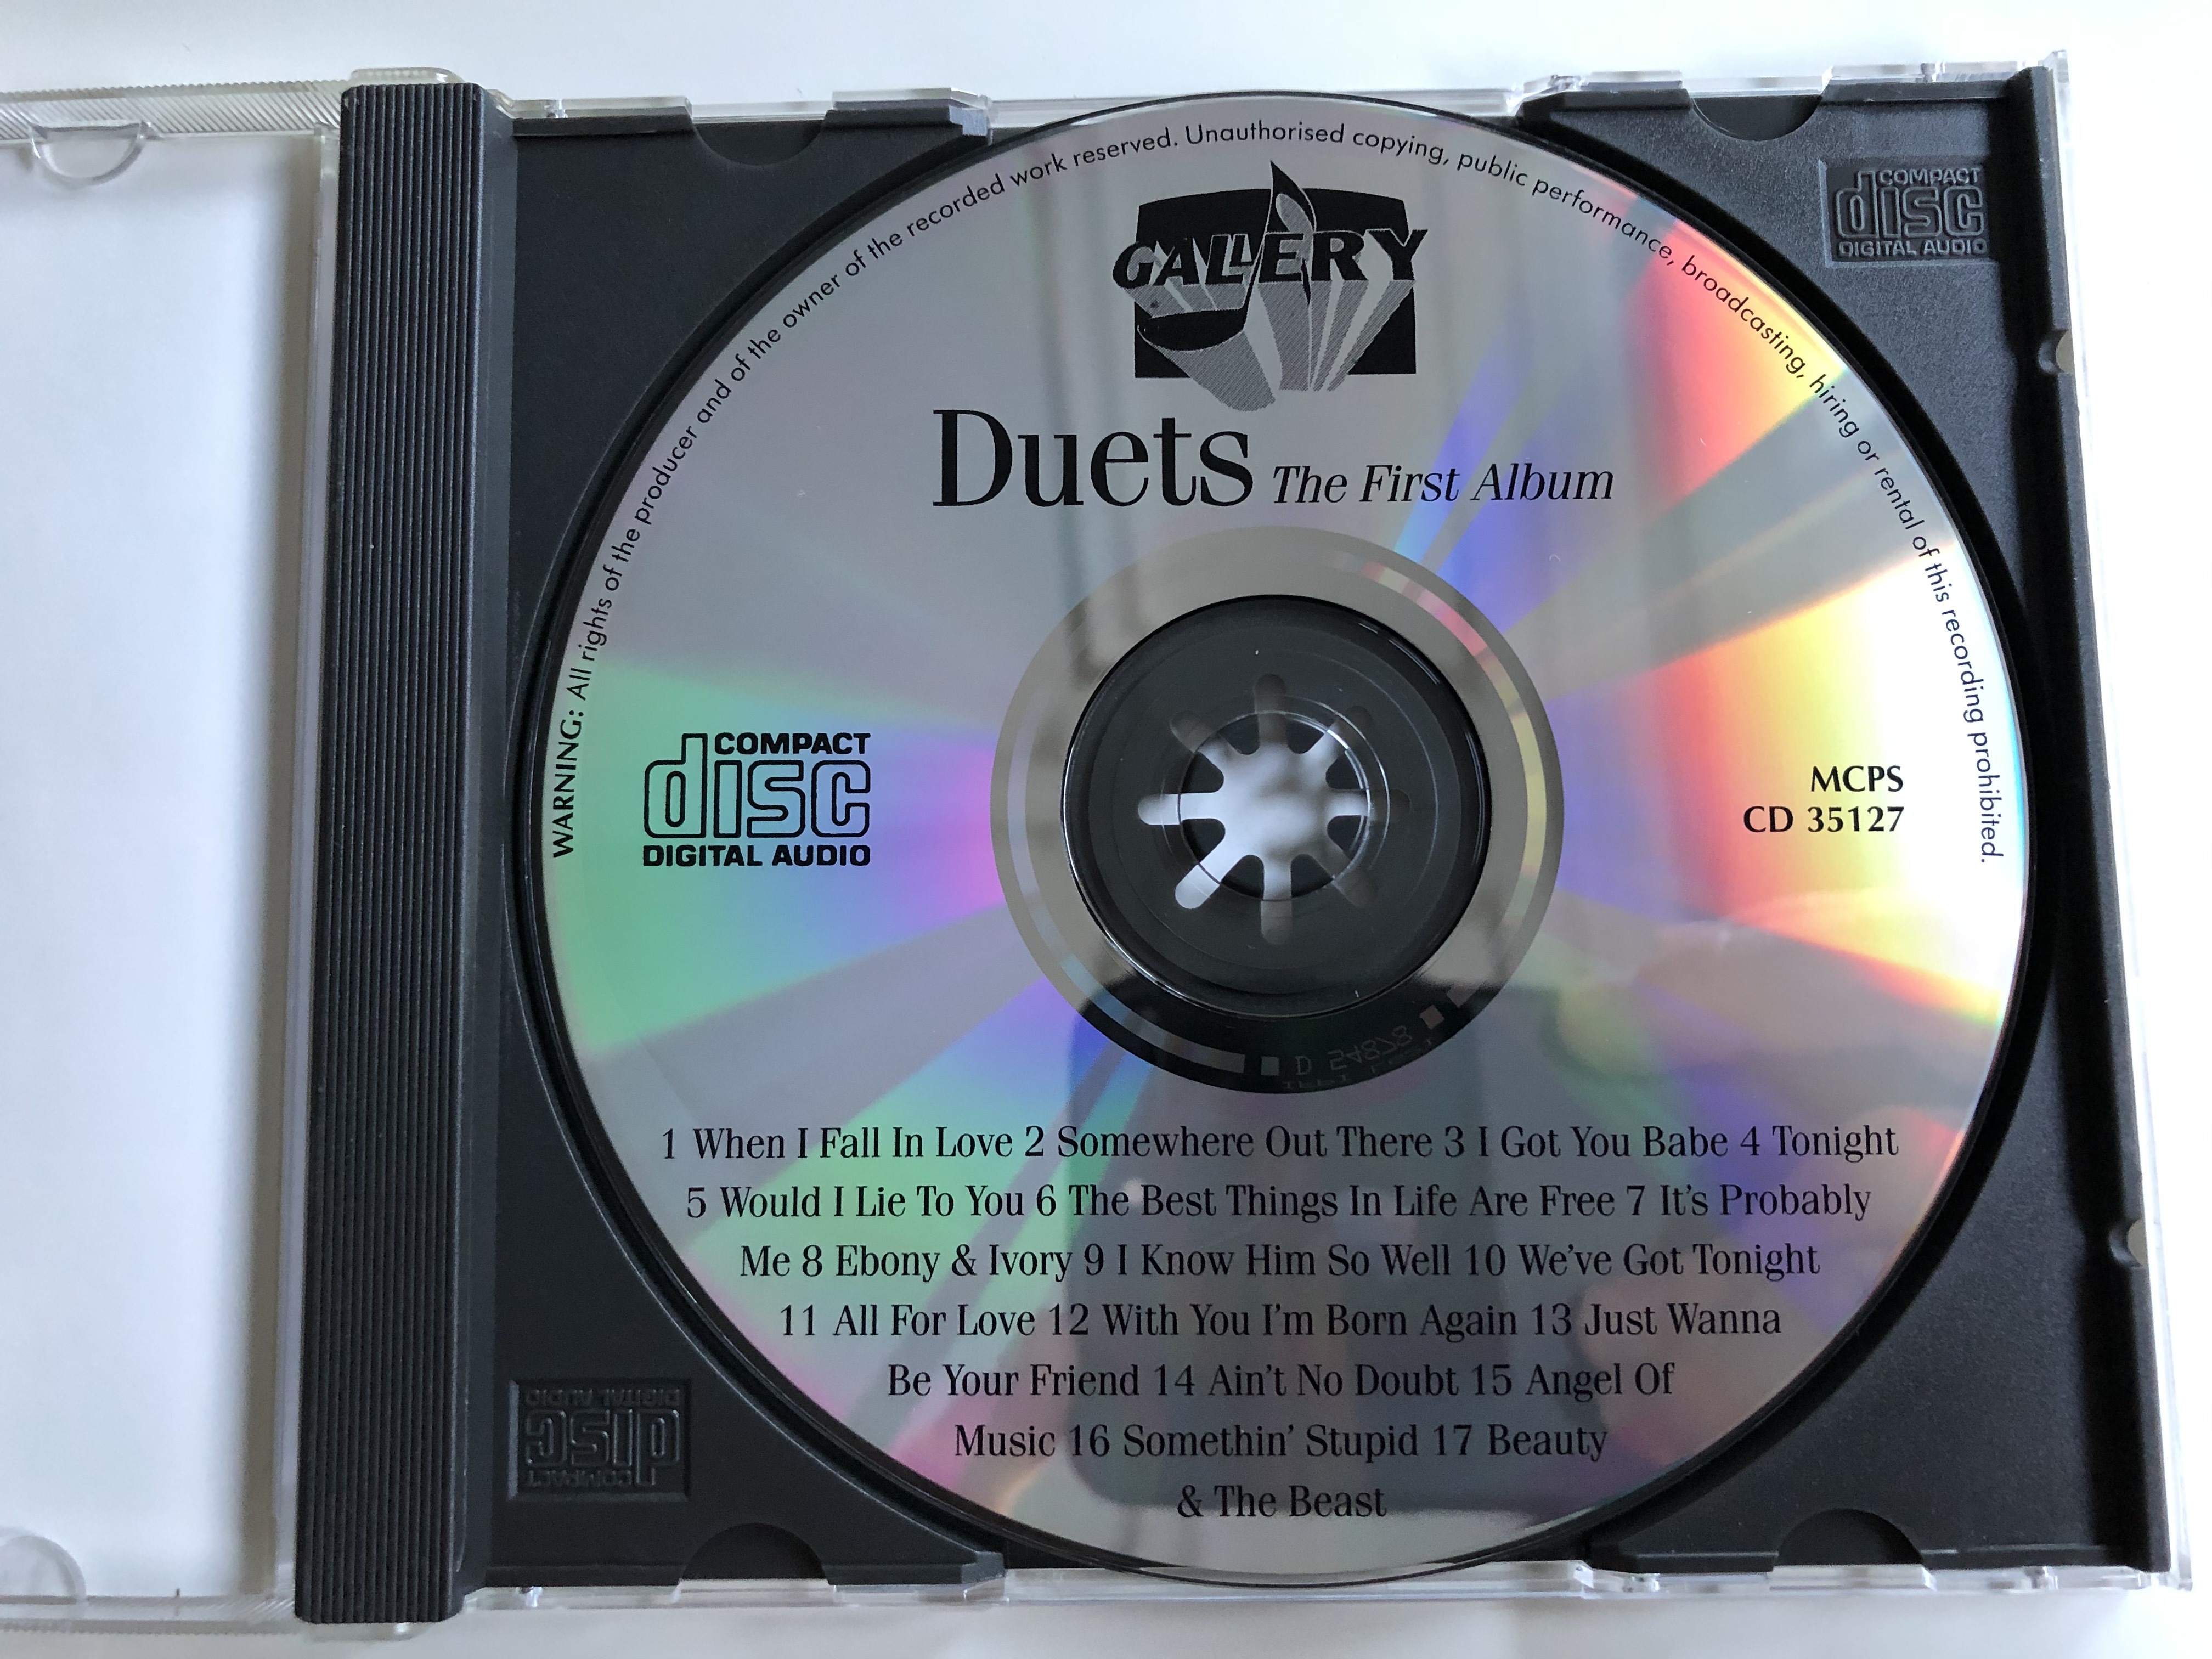 duets-the-first-album-the-best-pop-duets-of-all-time-the-tesca-all-stars-galery-audio-cd-cd-35127-2-.jpg